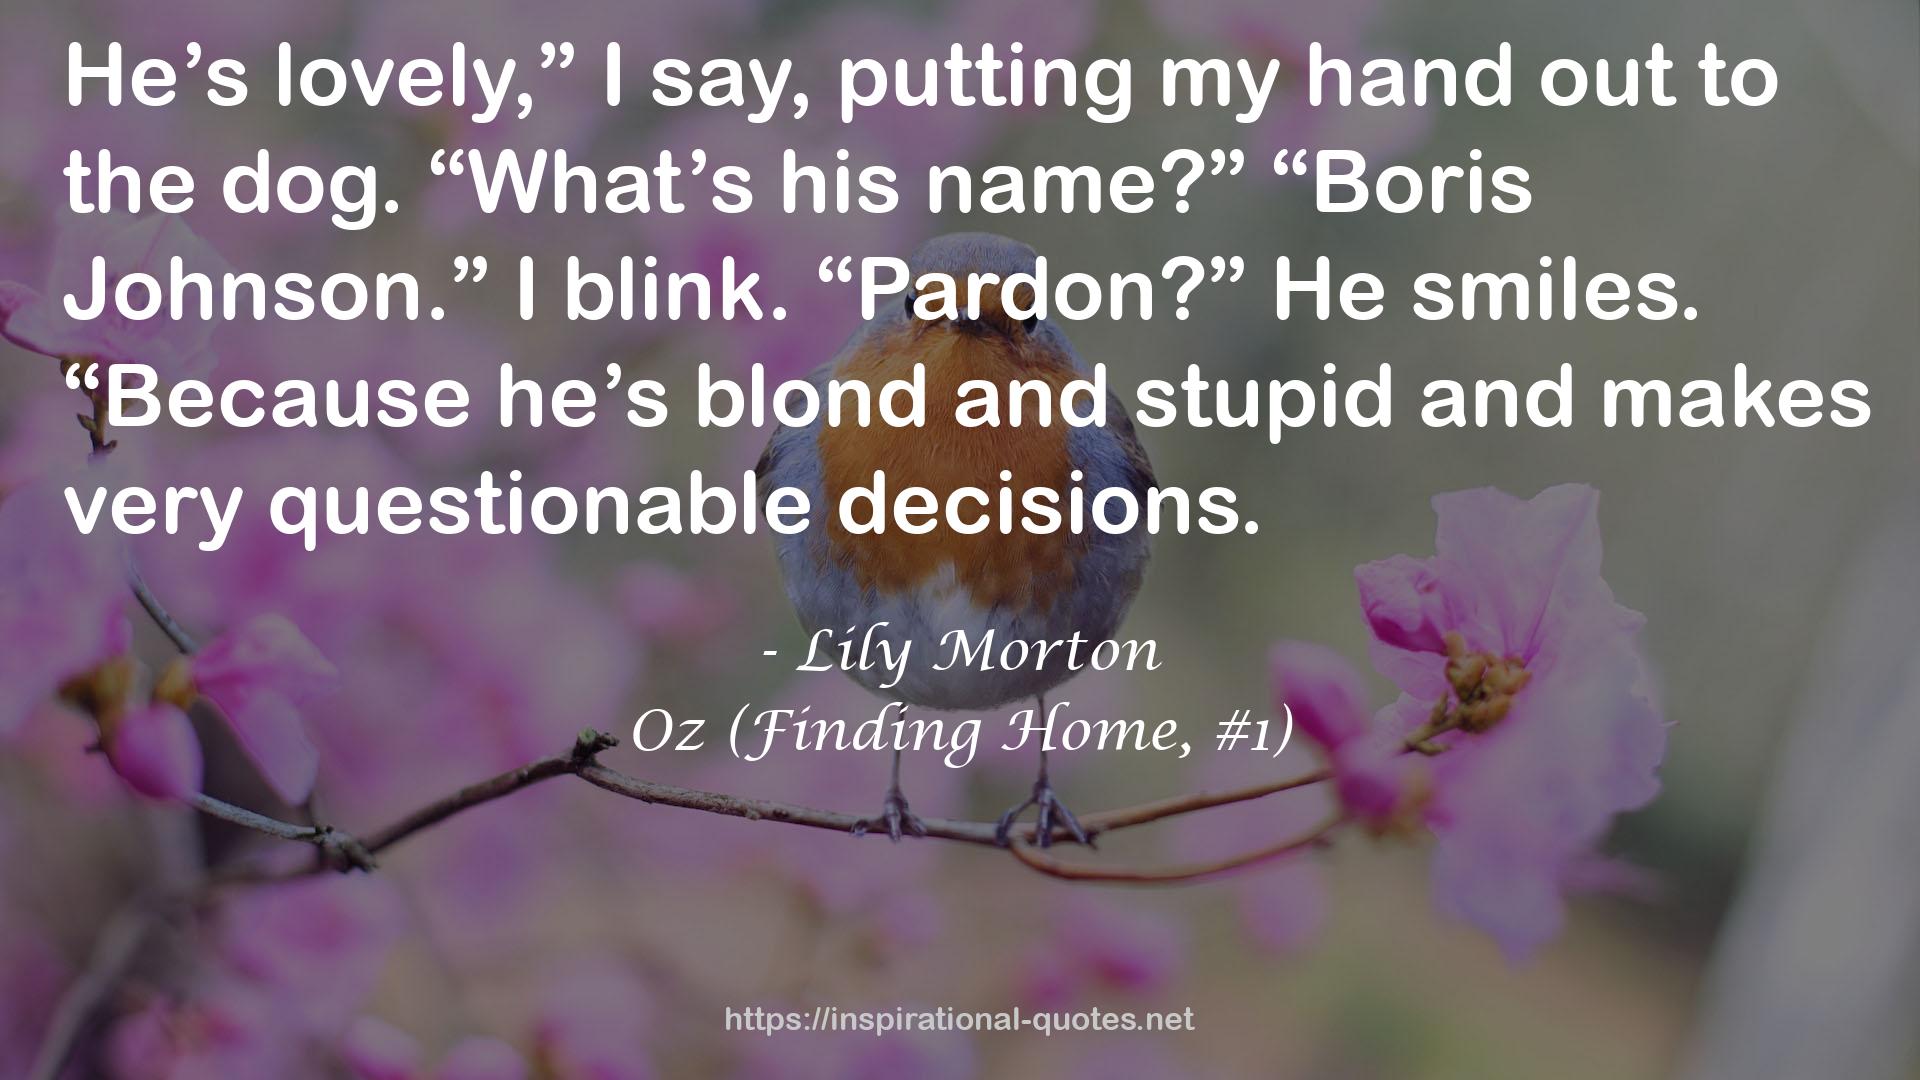 Oz (Finding Home, #1) QUOTES